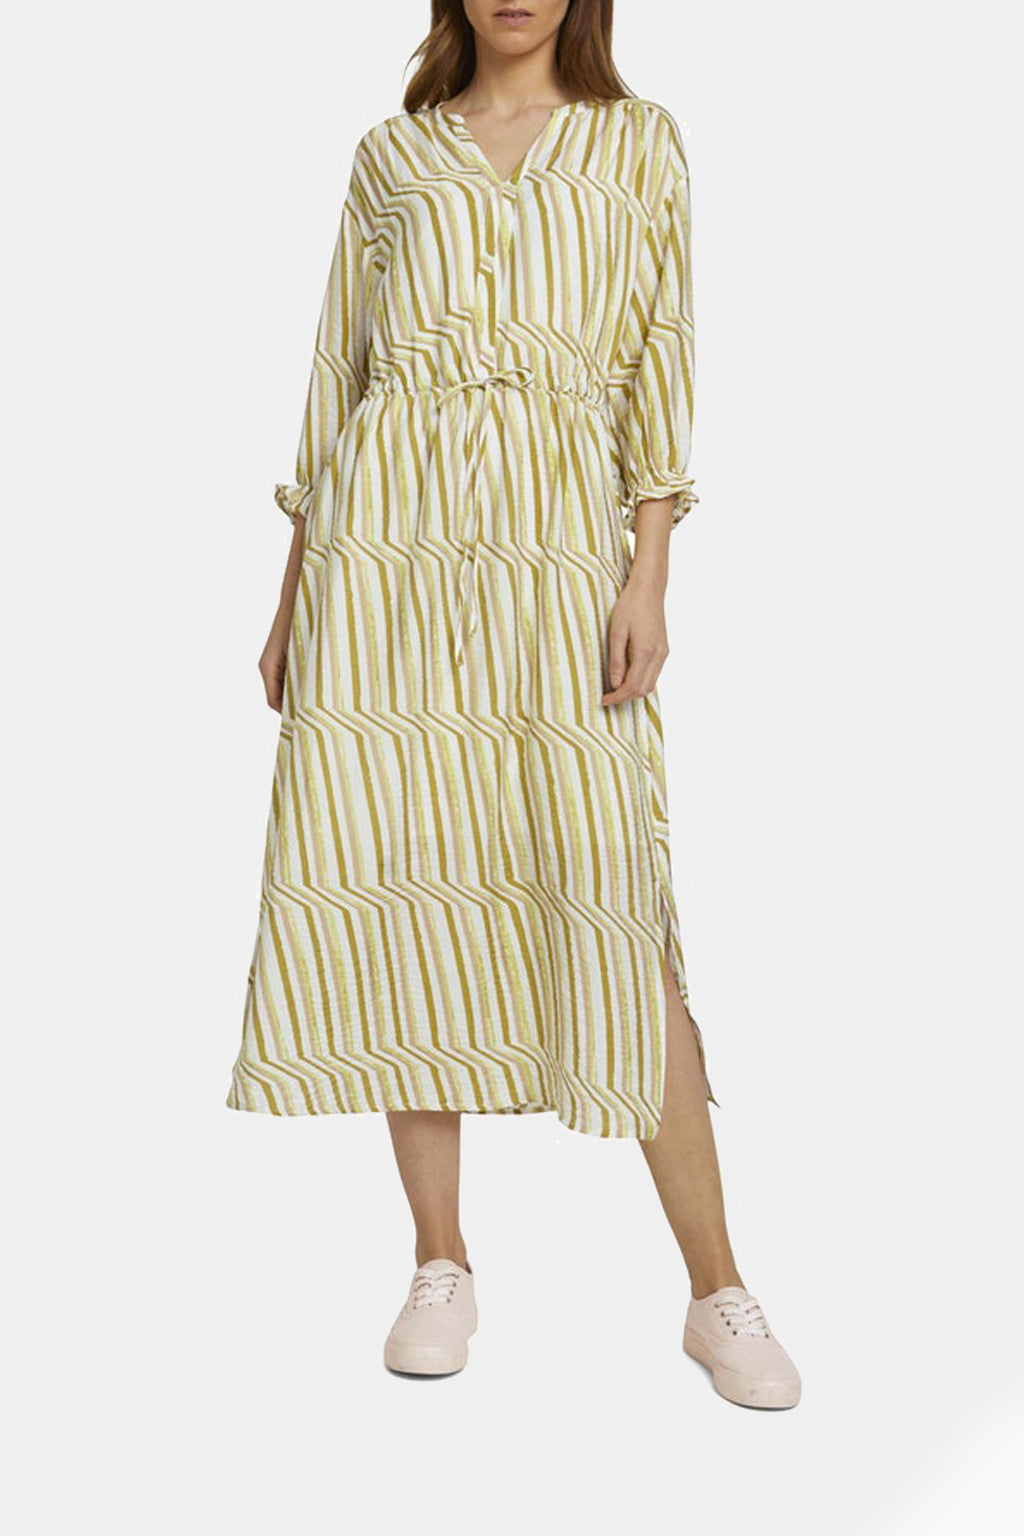 Tom Tailor - Patterned Dress With Waist Band